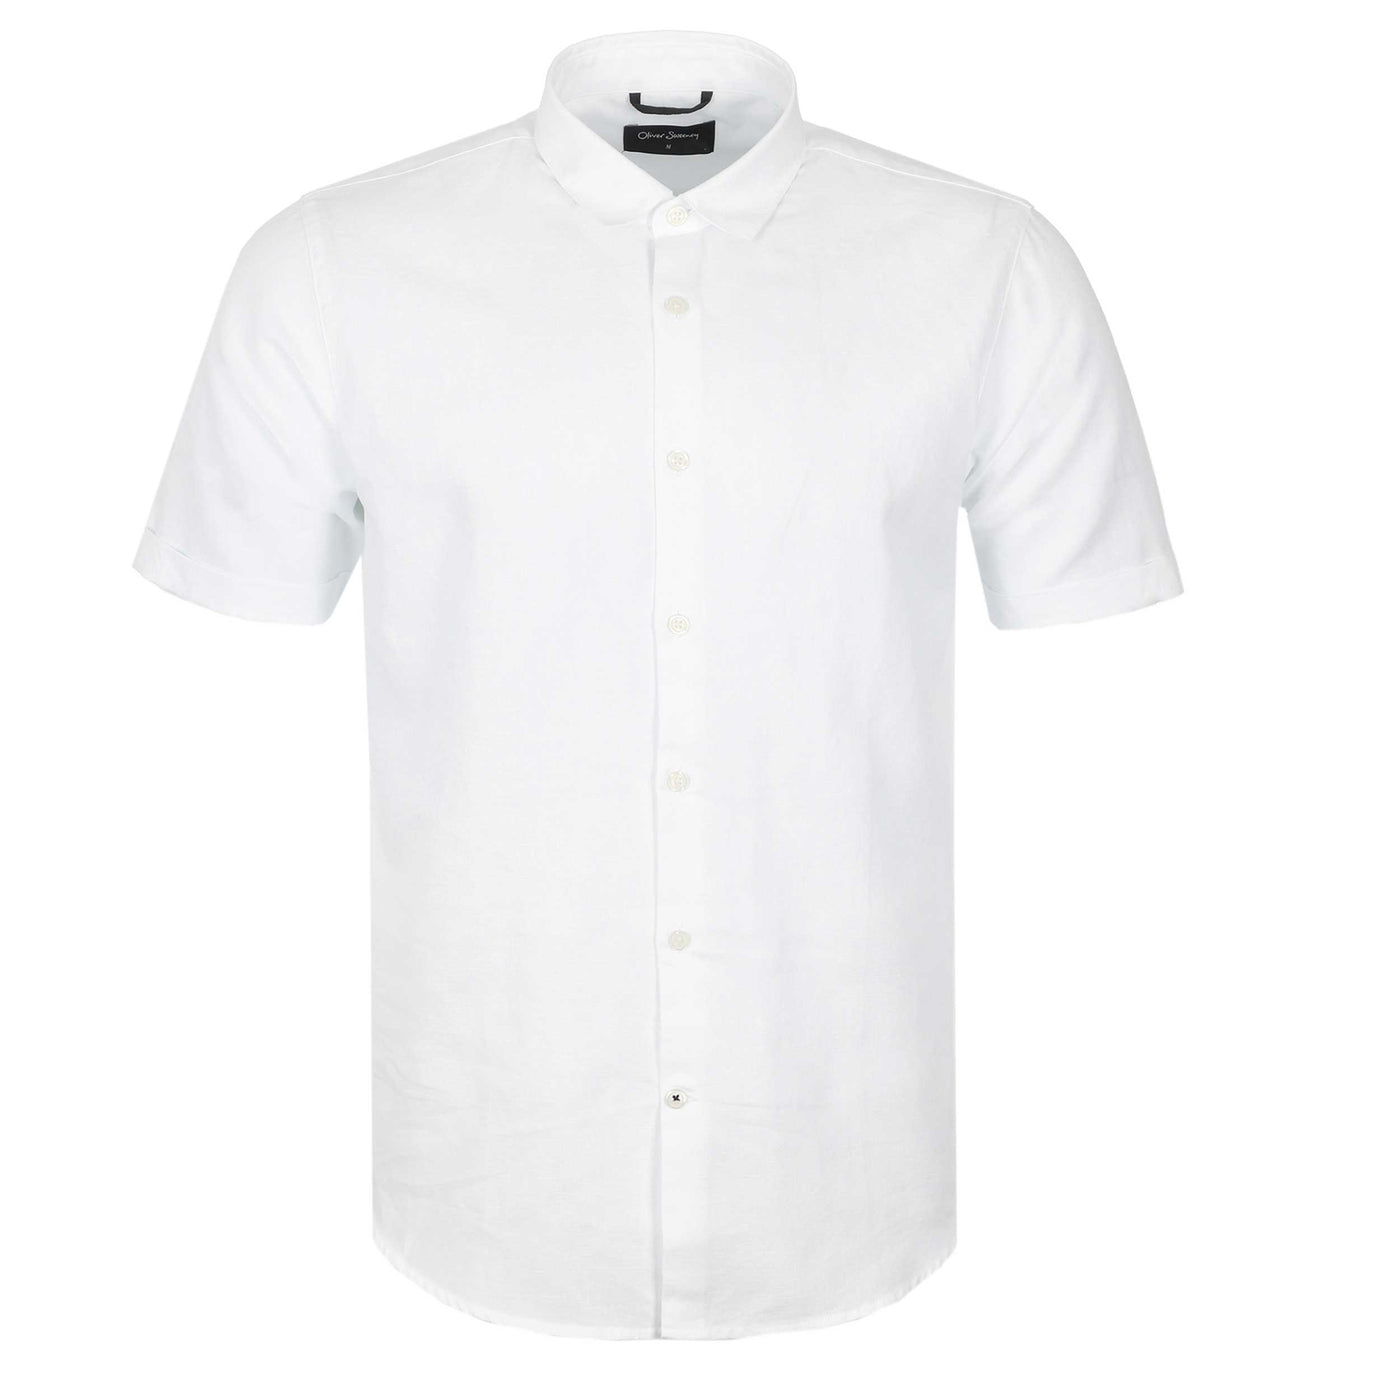 Oliver Sweeney Eakring SS Shirt in White Front